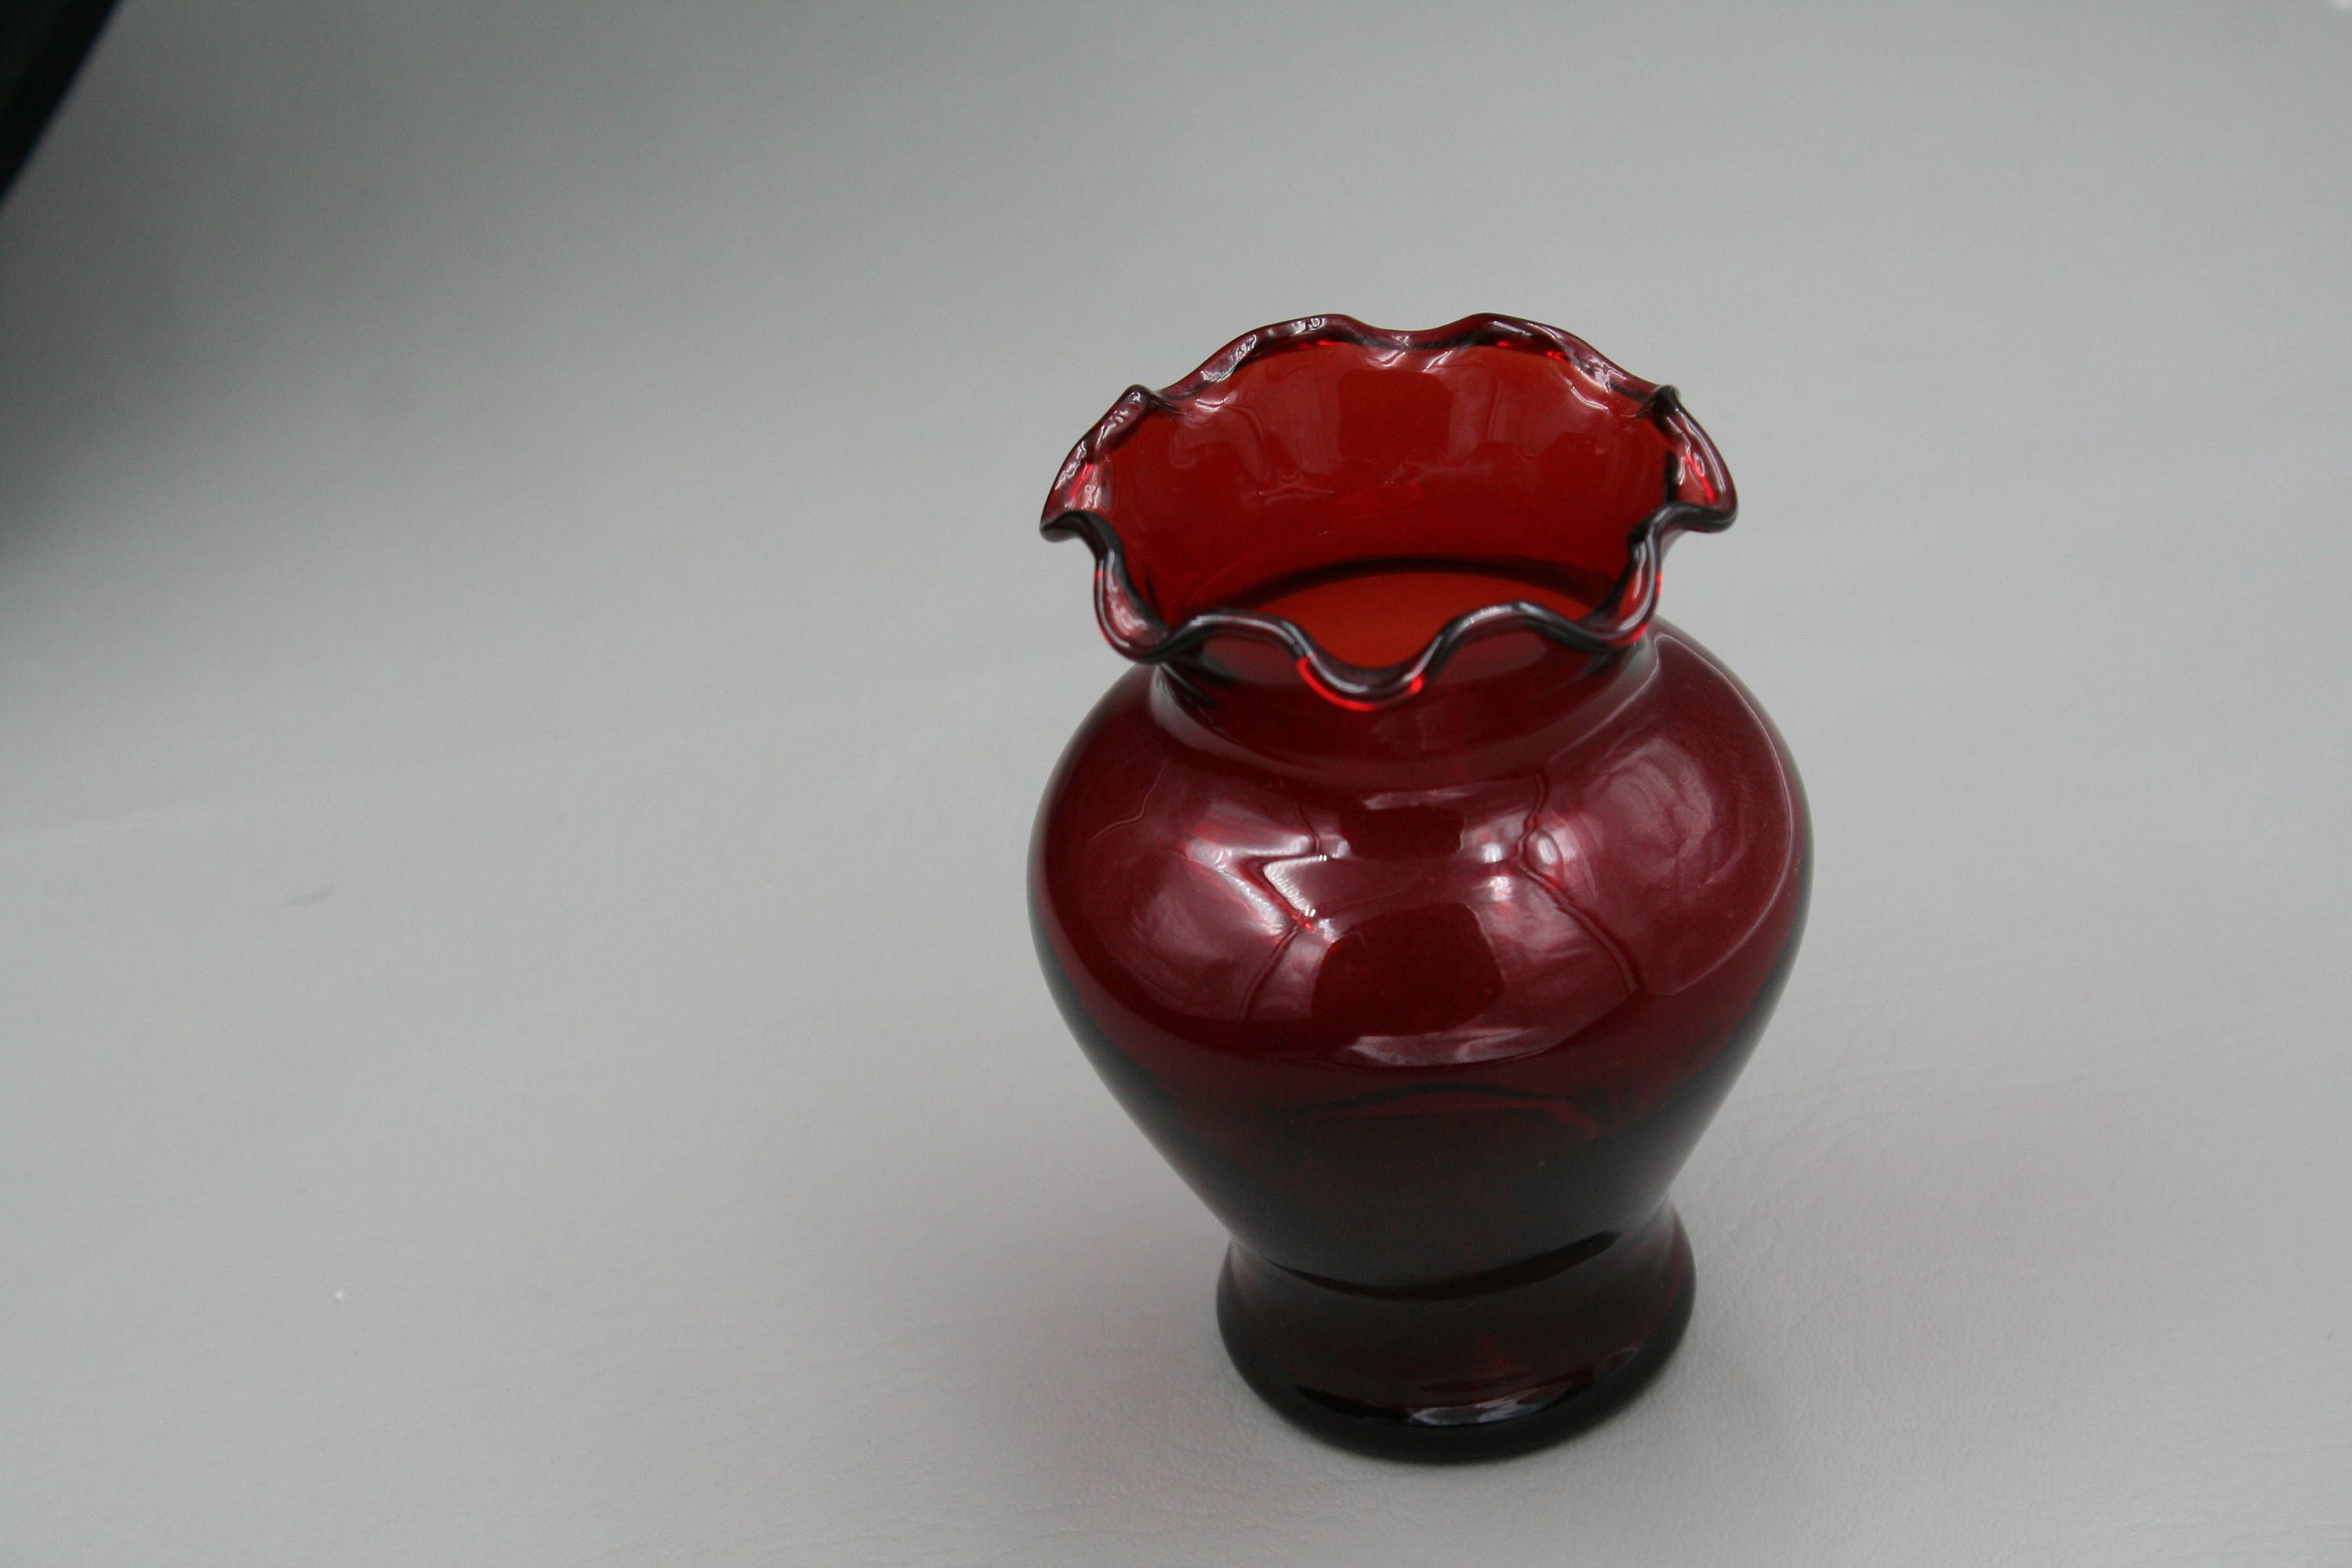 22 Amazing Frog Vase Pottery 2023 free download frog vase pottery of 21 glass vase with lid the weekly world with regard to cranberry red glass vase